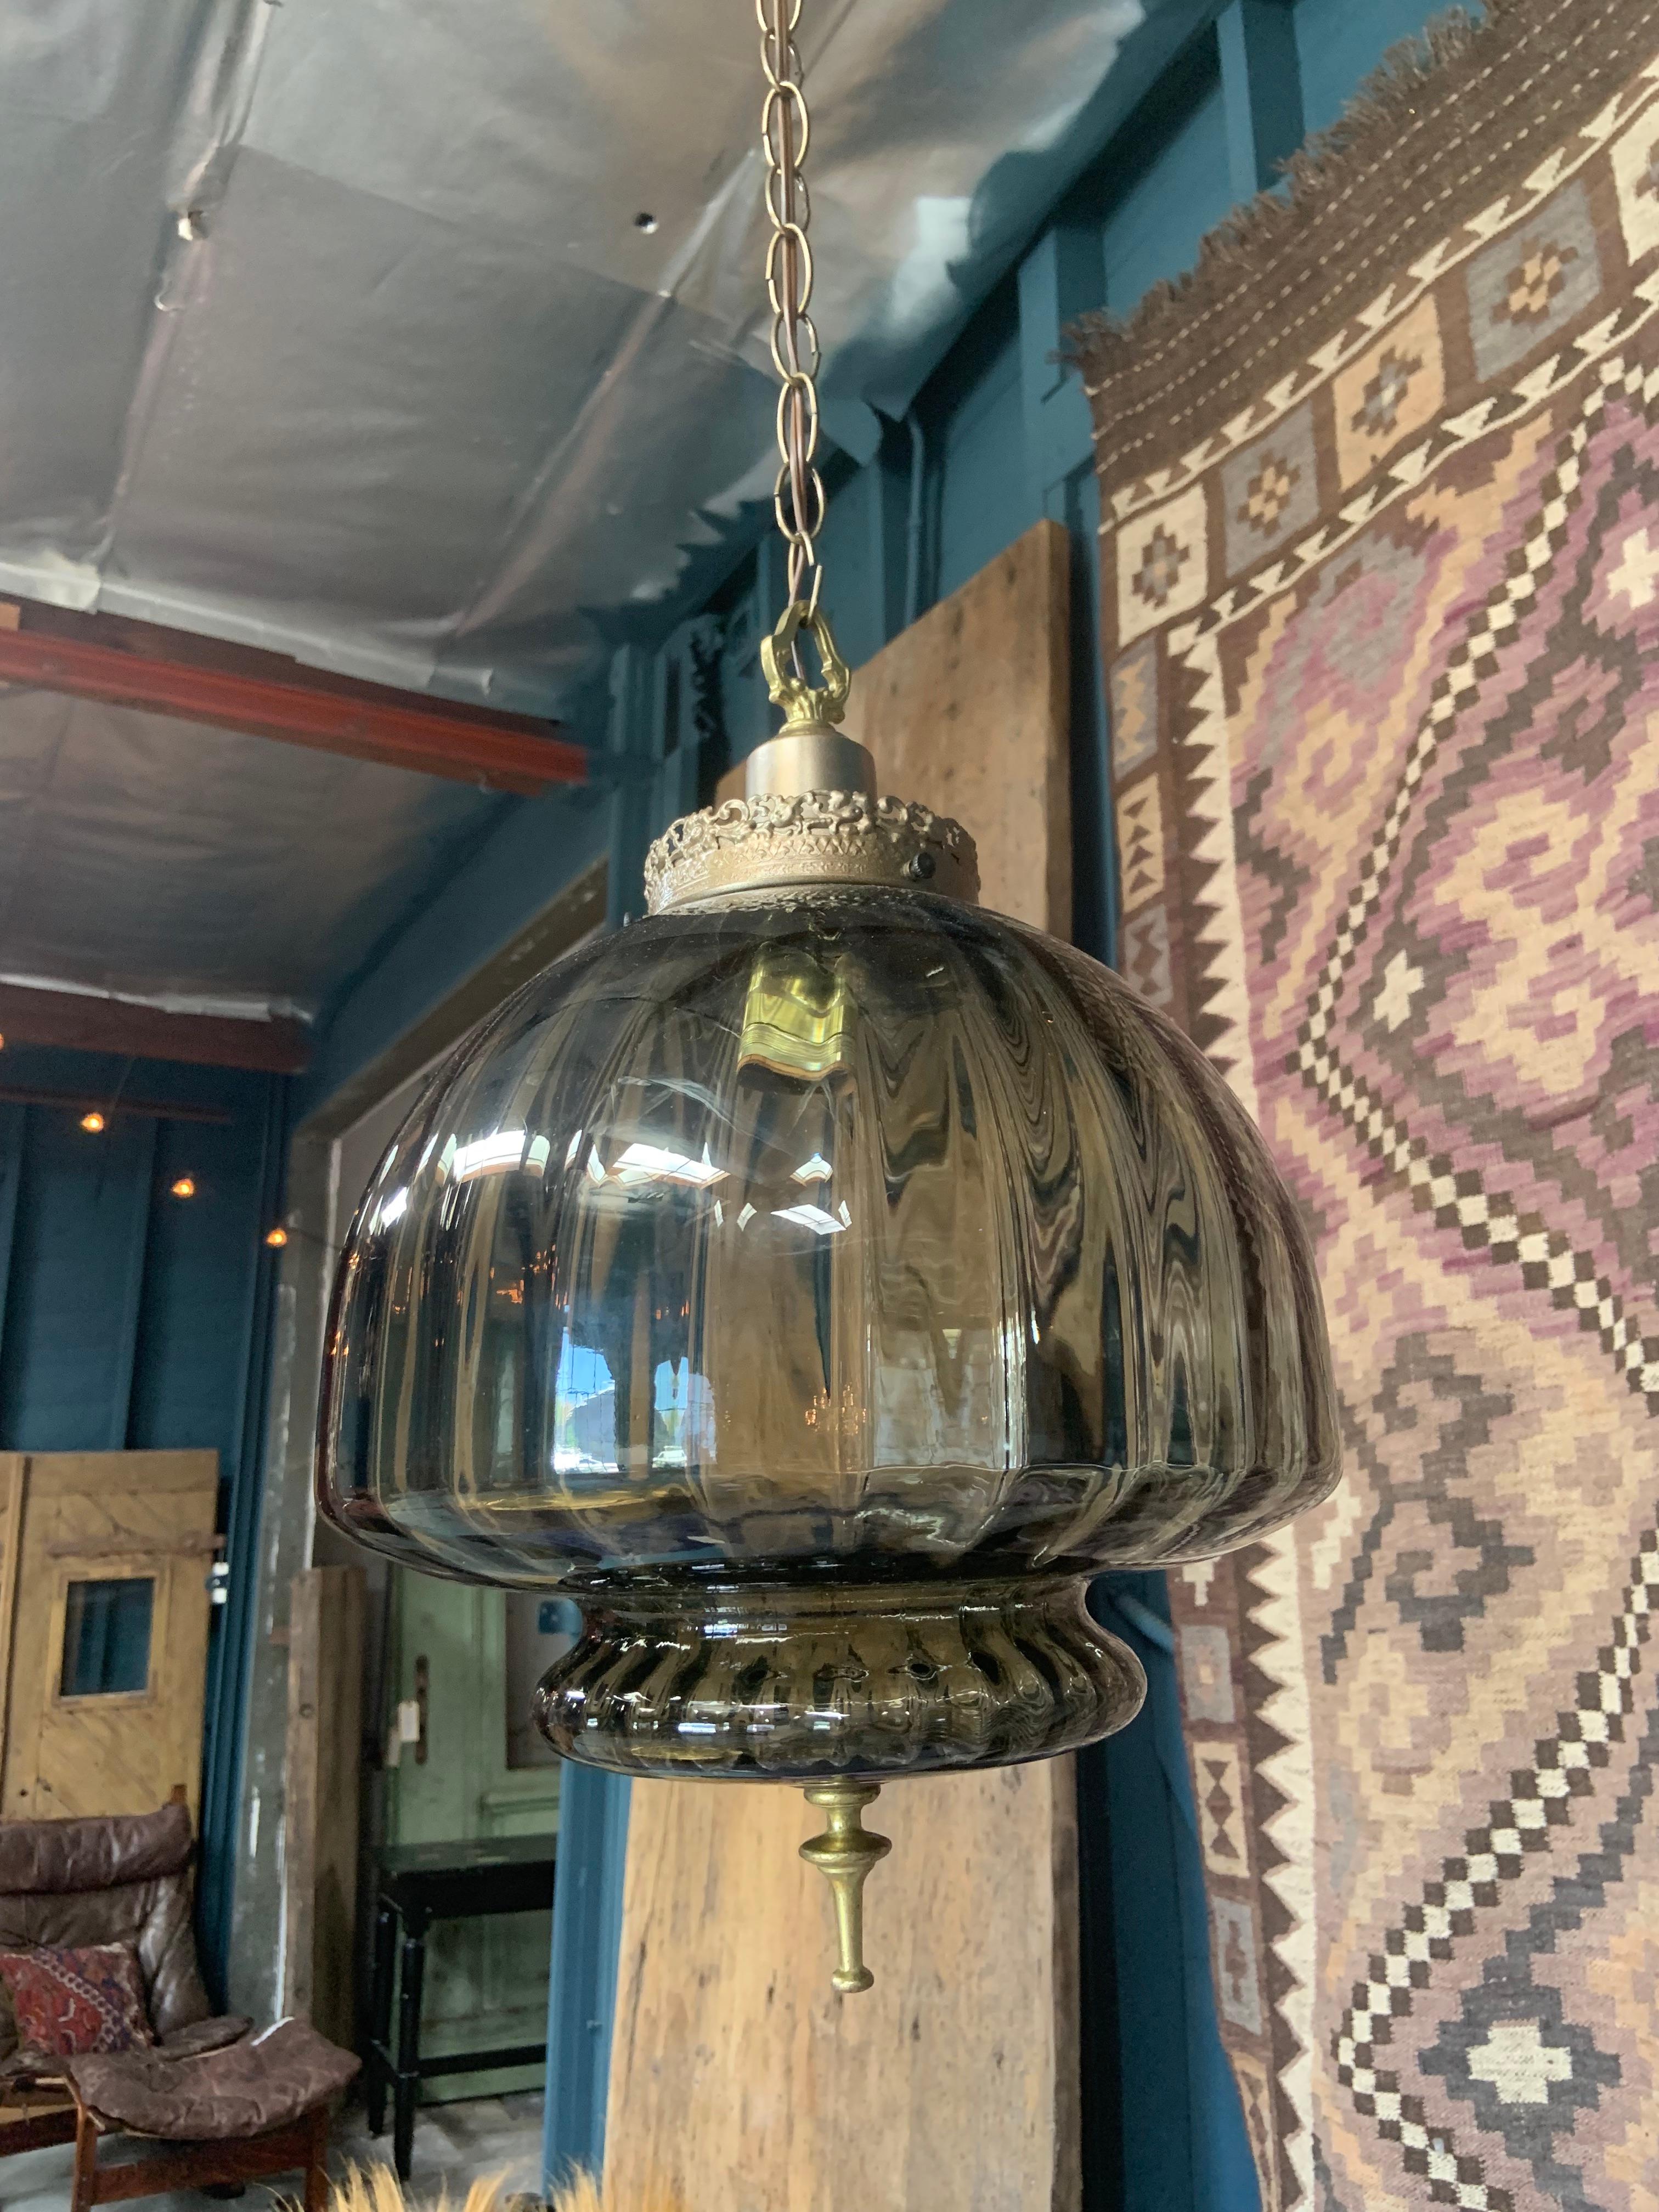 This uniquely designed glass hanging pendant has vertical ridges and a brass base with Victorian style accents. This combination of smokey glass and aged brass hardware creates a gorgeous mood in any space.